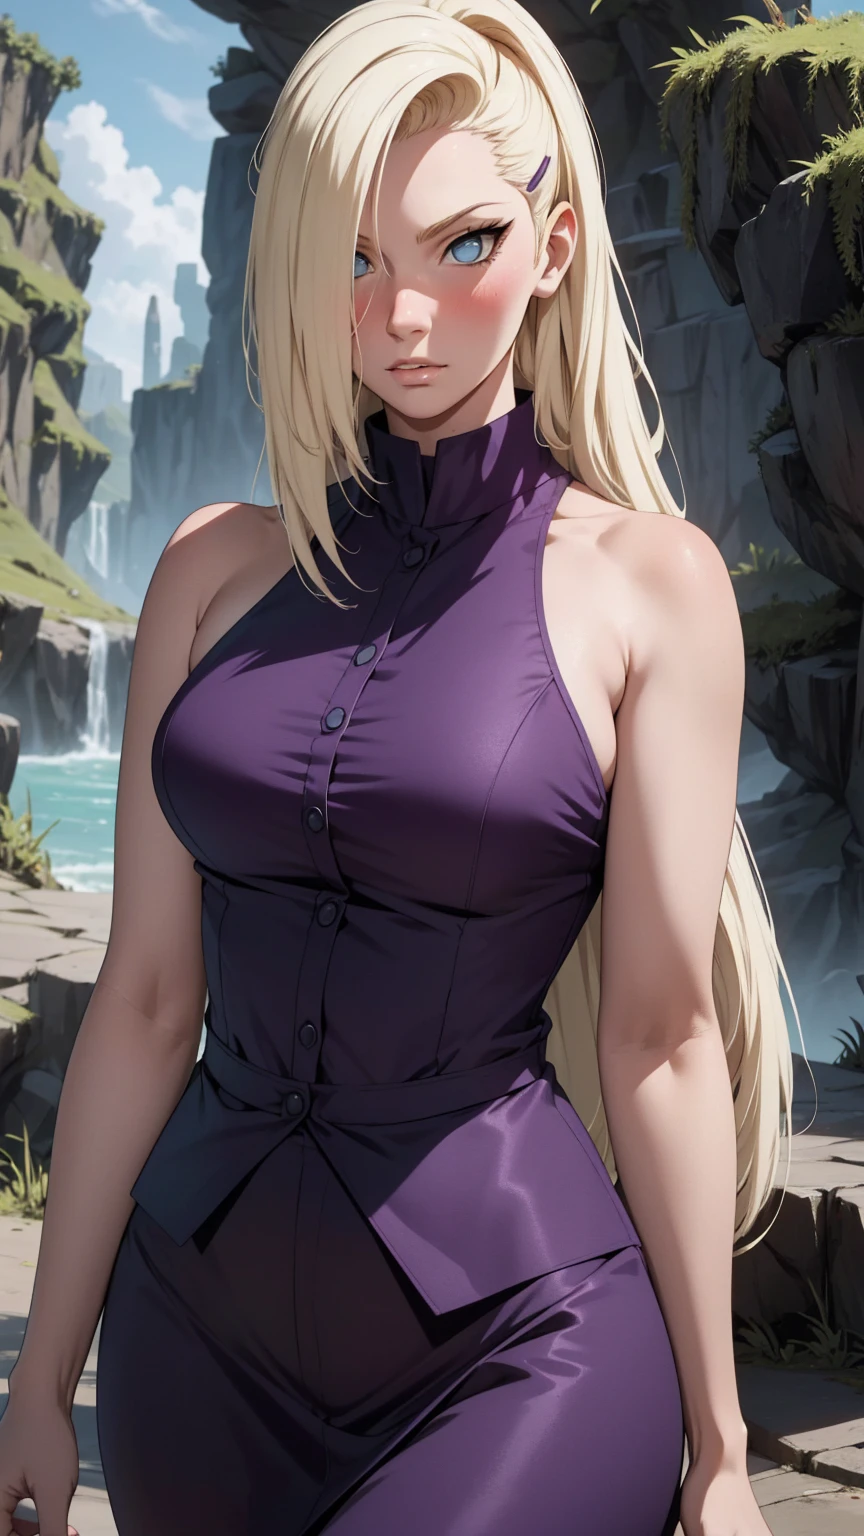 {-erro_de_anatomia:1.0} estilo anime, Masterpiece, absurdities, Yamanaka Ino\(Naruto\), 1girl Solo, woman, Perfect composition, Detailed lips, Beautiful face, body proportion, Blush, Long blonde hair, blue eyes, purple blouse, purple pant, Soft gauze, Super realistic, Detailed, photo shoot, Realistic faces and bodies, masterpiece, best quality, best illustration, hyper detailed, 1 woman, solo, glamorous, blushing, upper body, fighting, on nature, look at the view, dimanic poses,